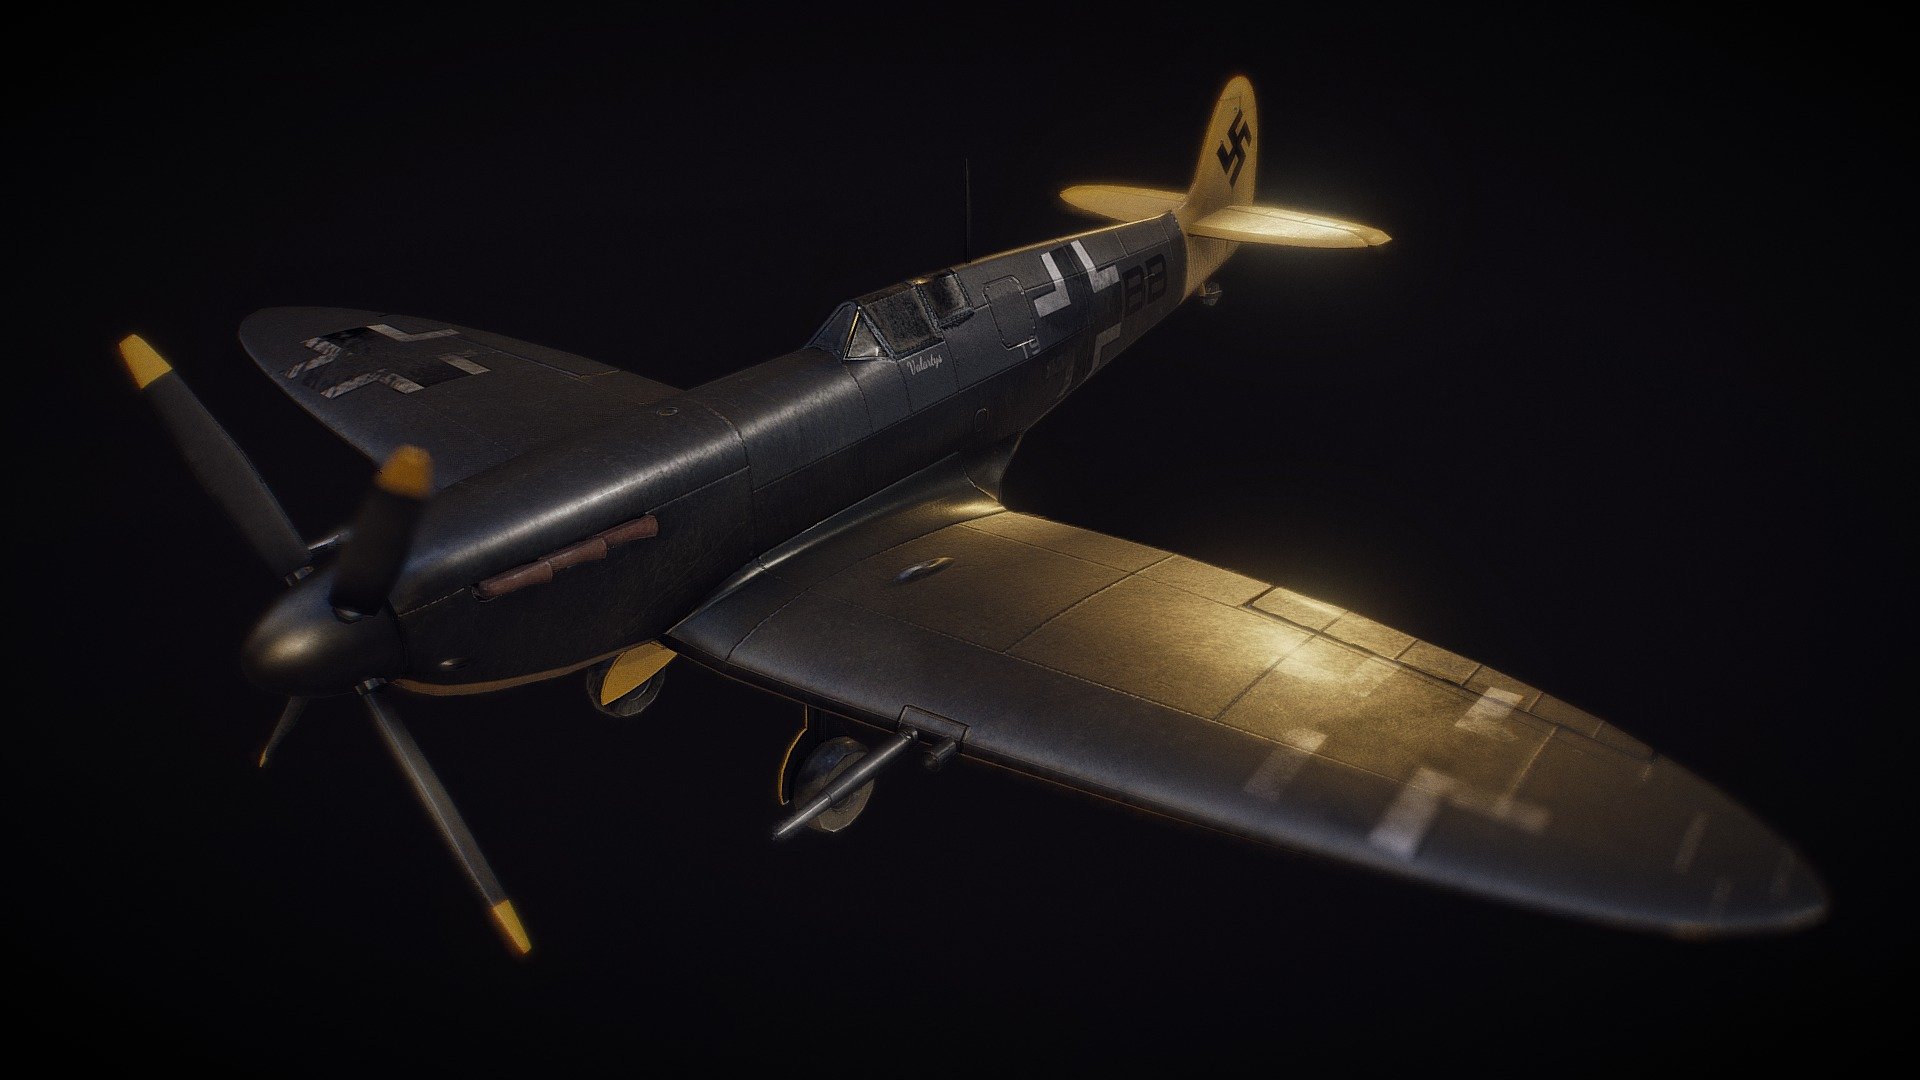 A spitfire captured by Germans, repainted in German markings and used as a special test unit of the Luftwaffe, the Zirkus Rosarius

Based on “Aircraft Painting Contest – Base” by Renafox, licensed under CC Attribution-ShareAlike.

P.S: This piece and/or any part of the image, is not intended to be offensive in any way 3d model